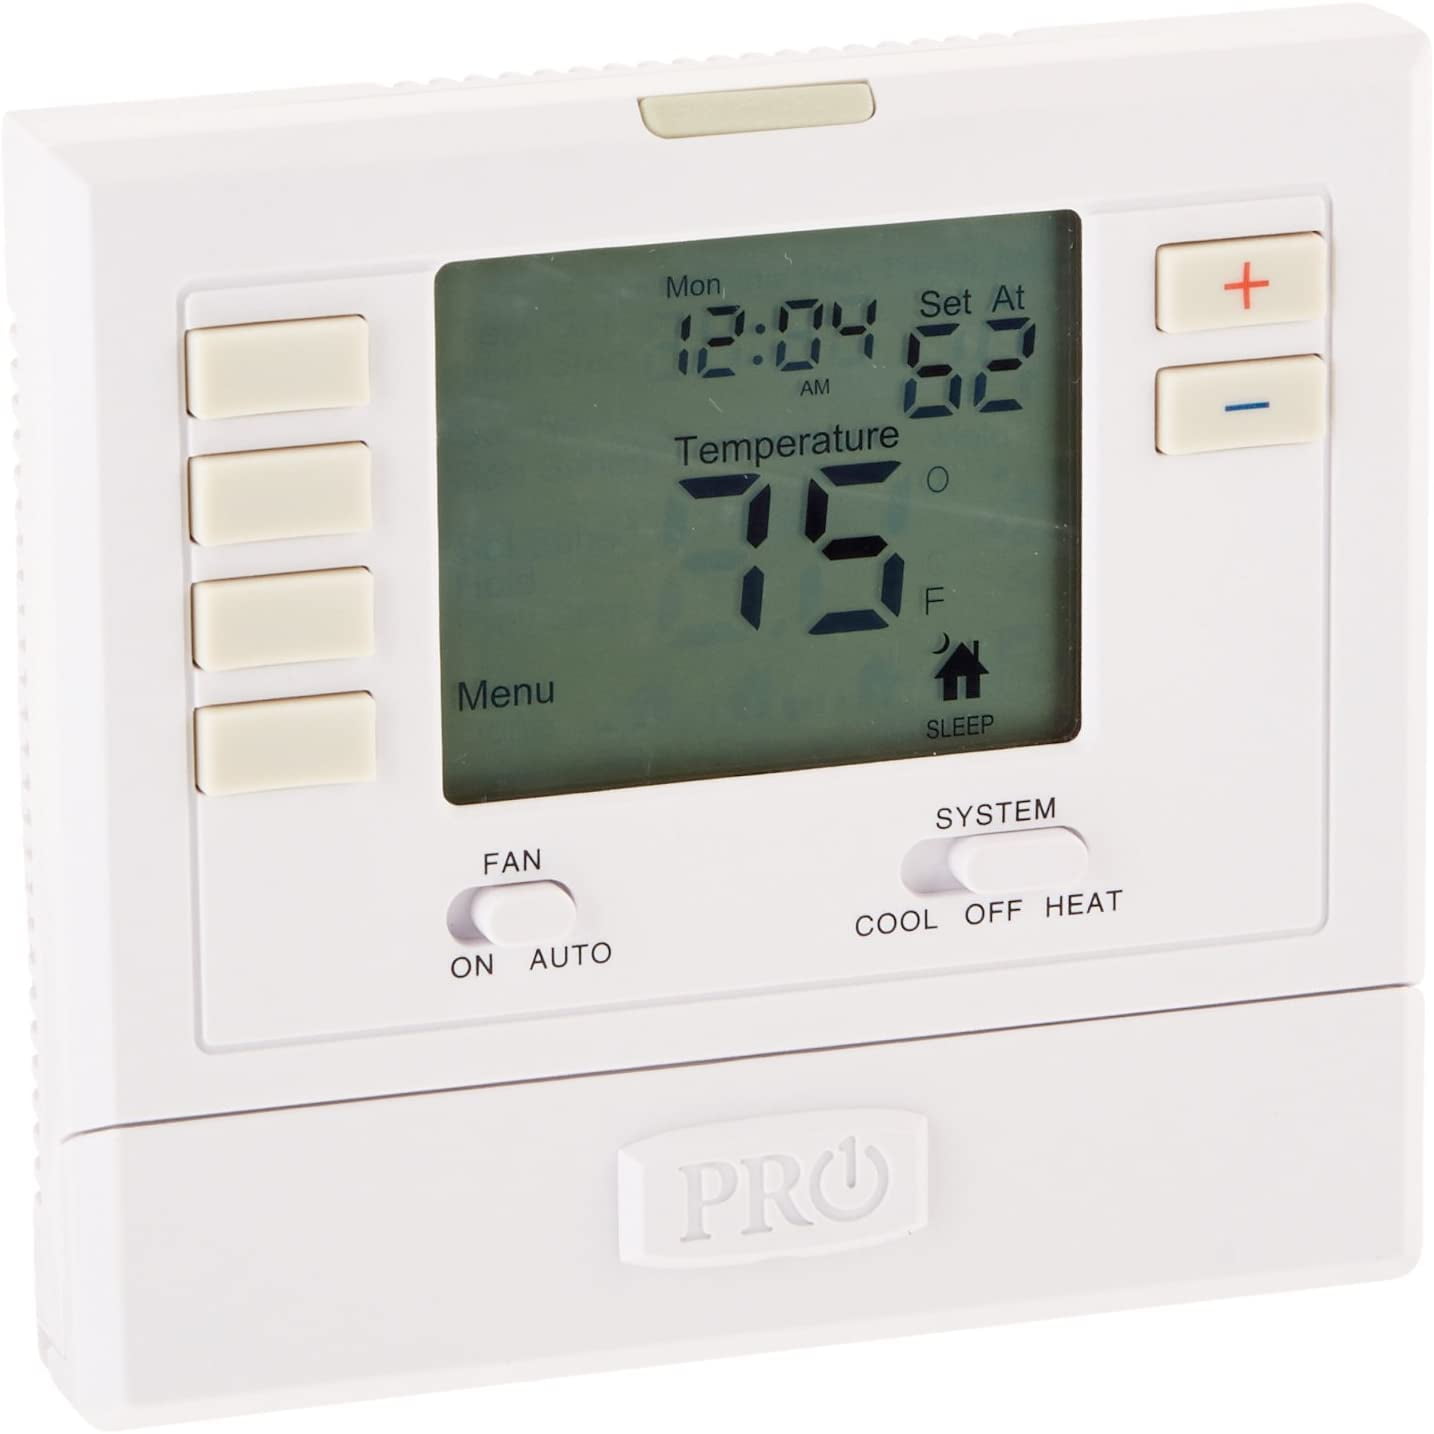 Pro1 IAQ T601-2 Single-stage 1 Hot1 Cold Non-programmable Thermostat for sale online 